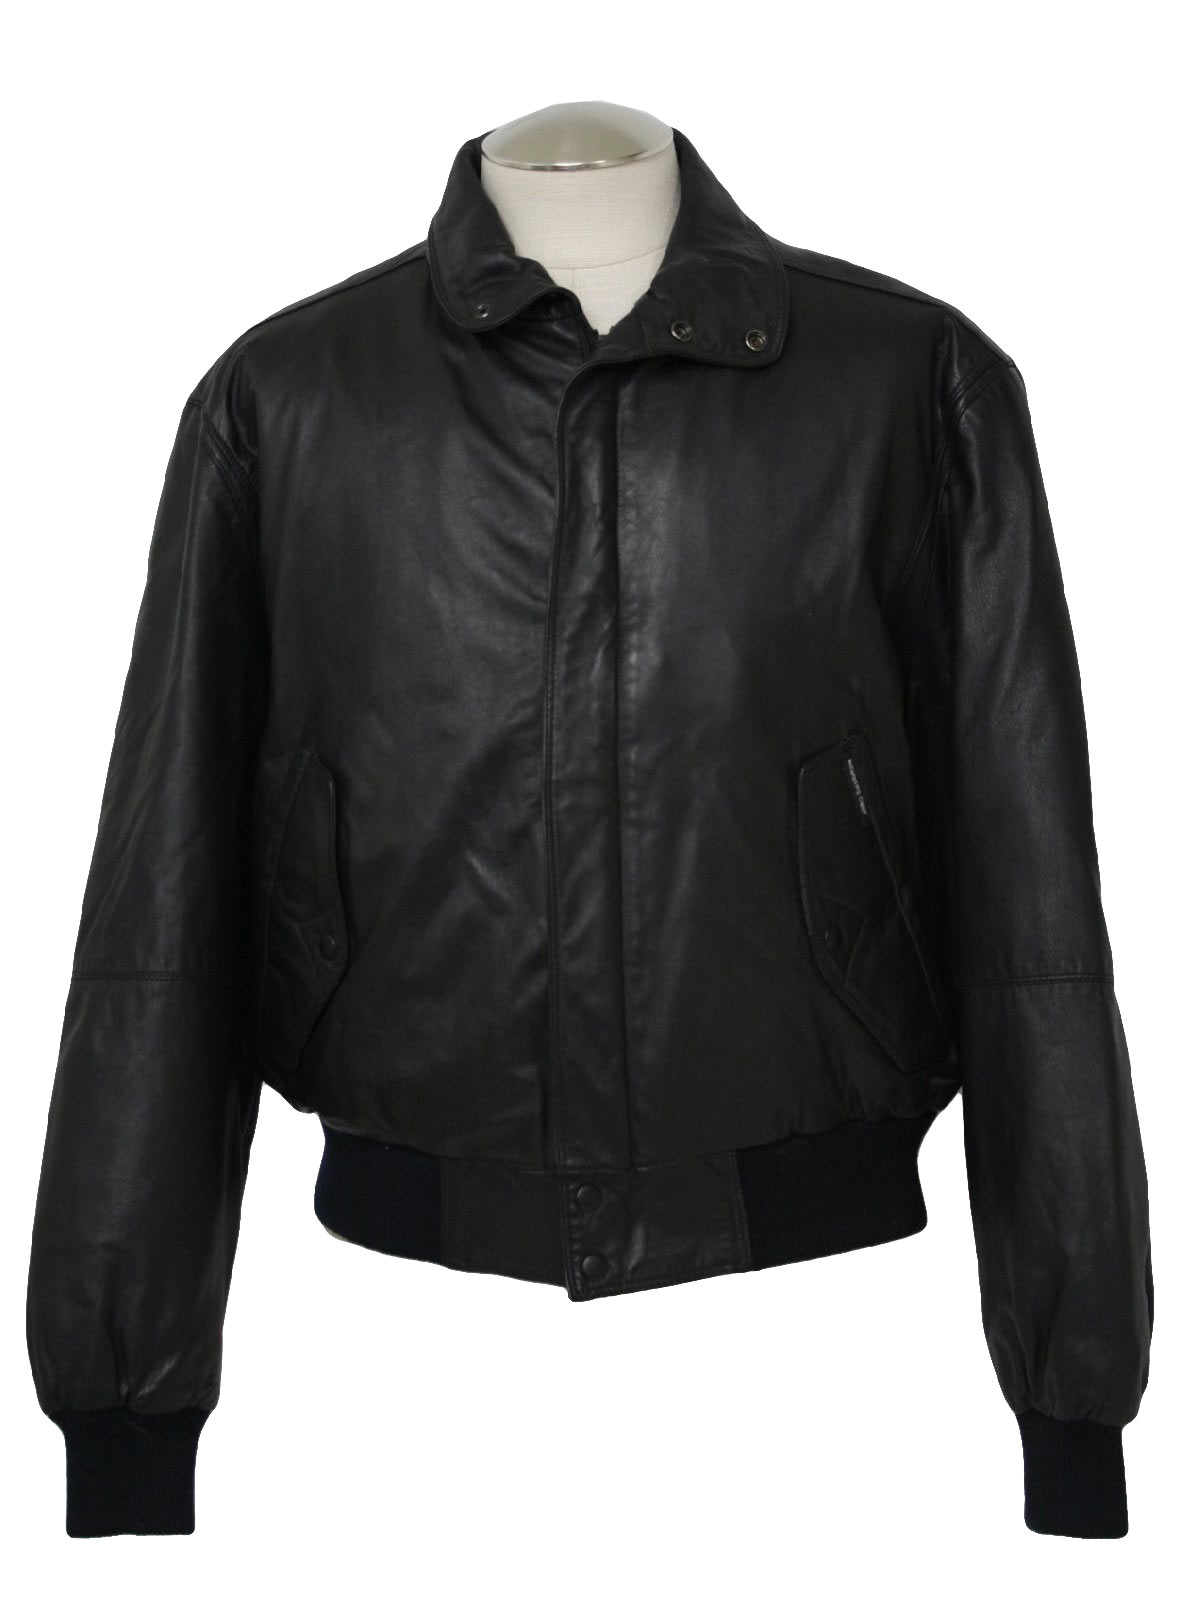 Vintage 80s Leather Jacket: 80s -Members Only- Mens black leather with ...